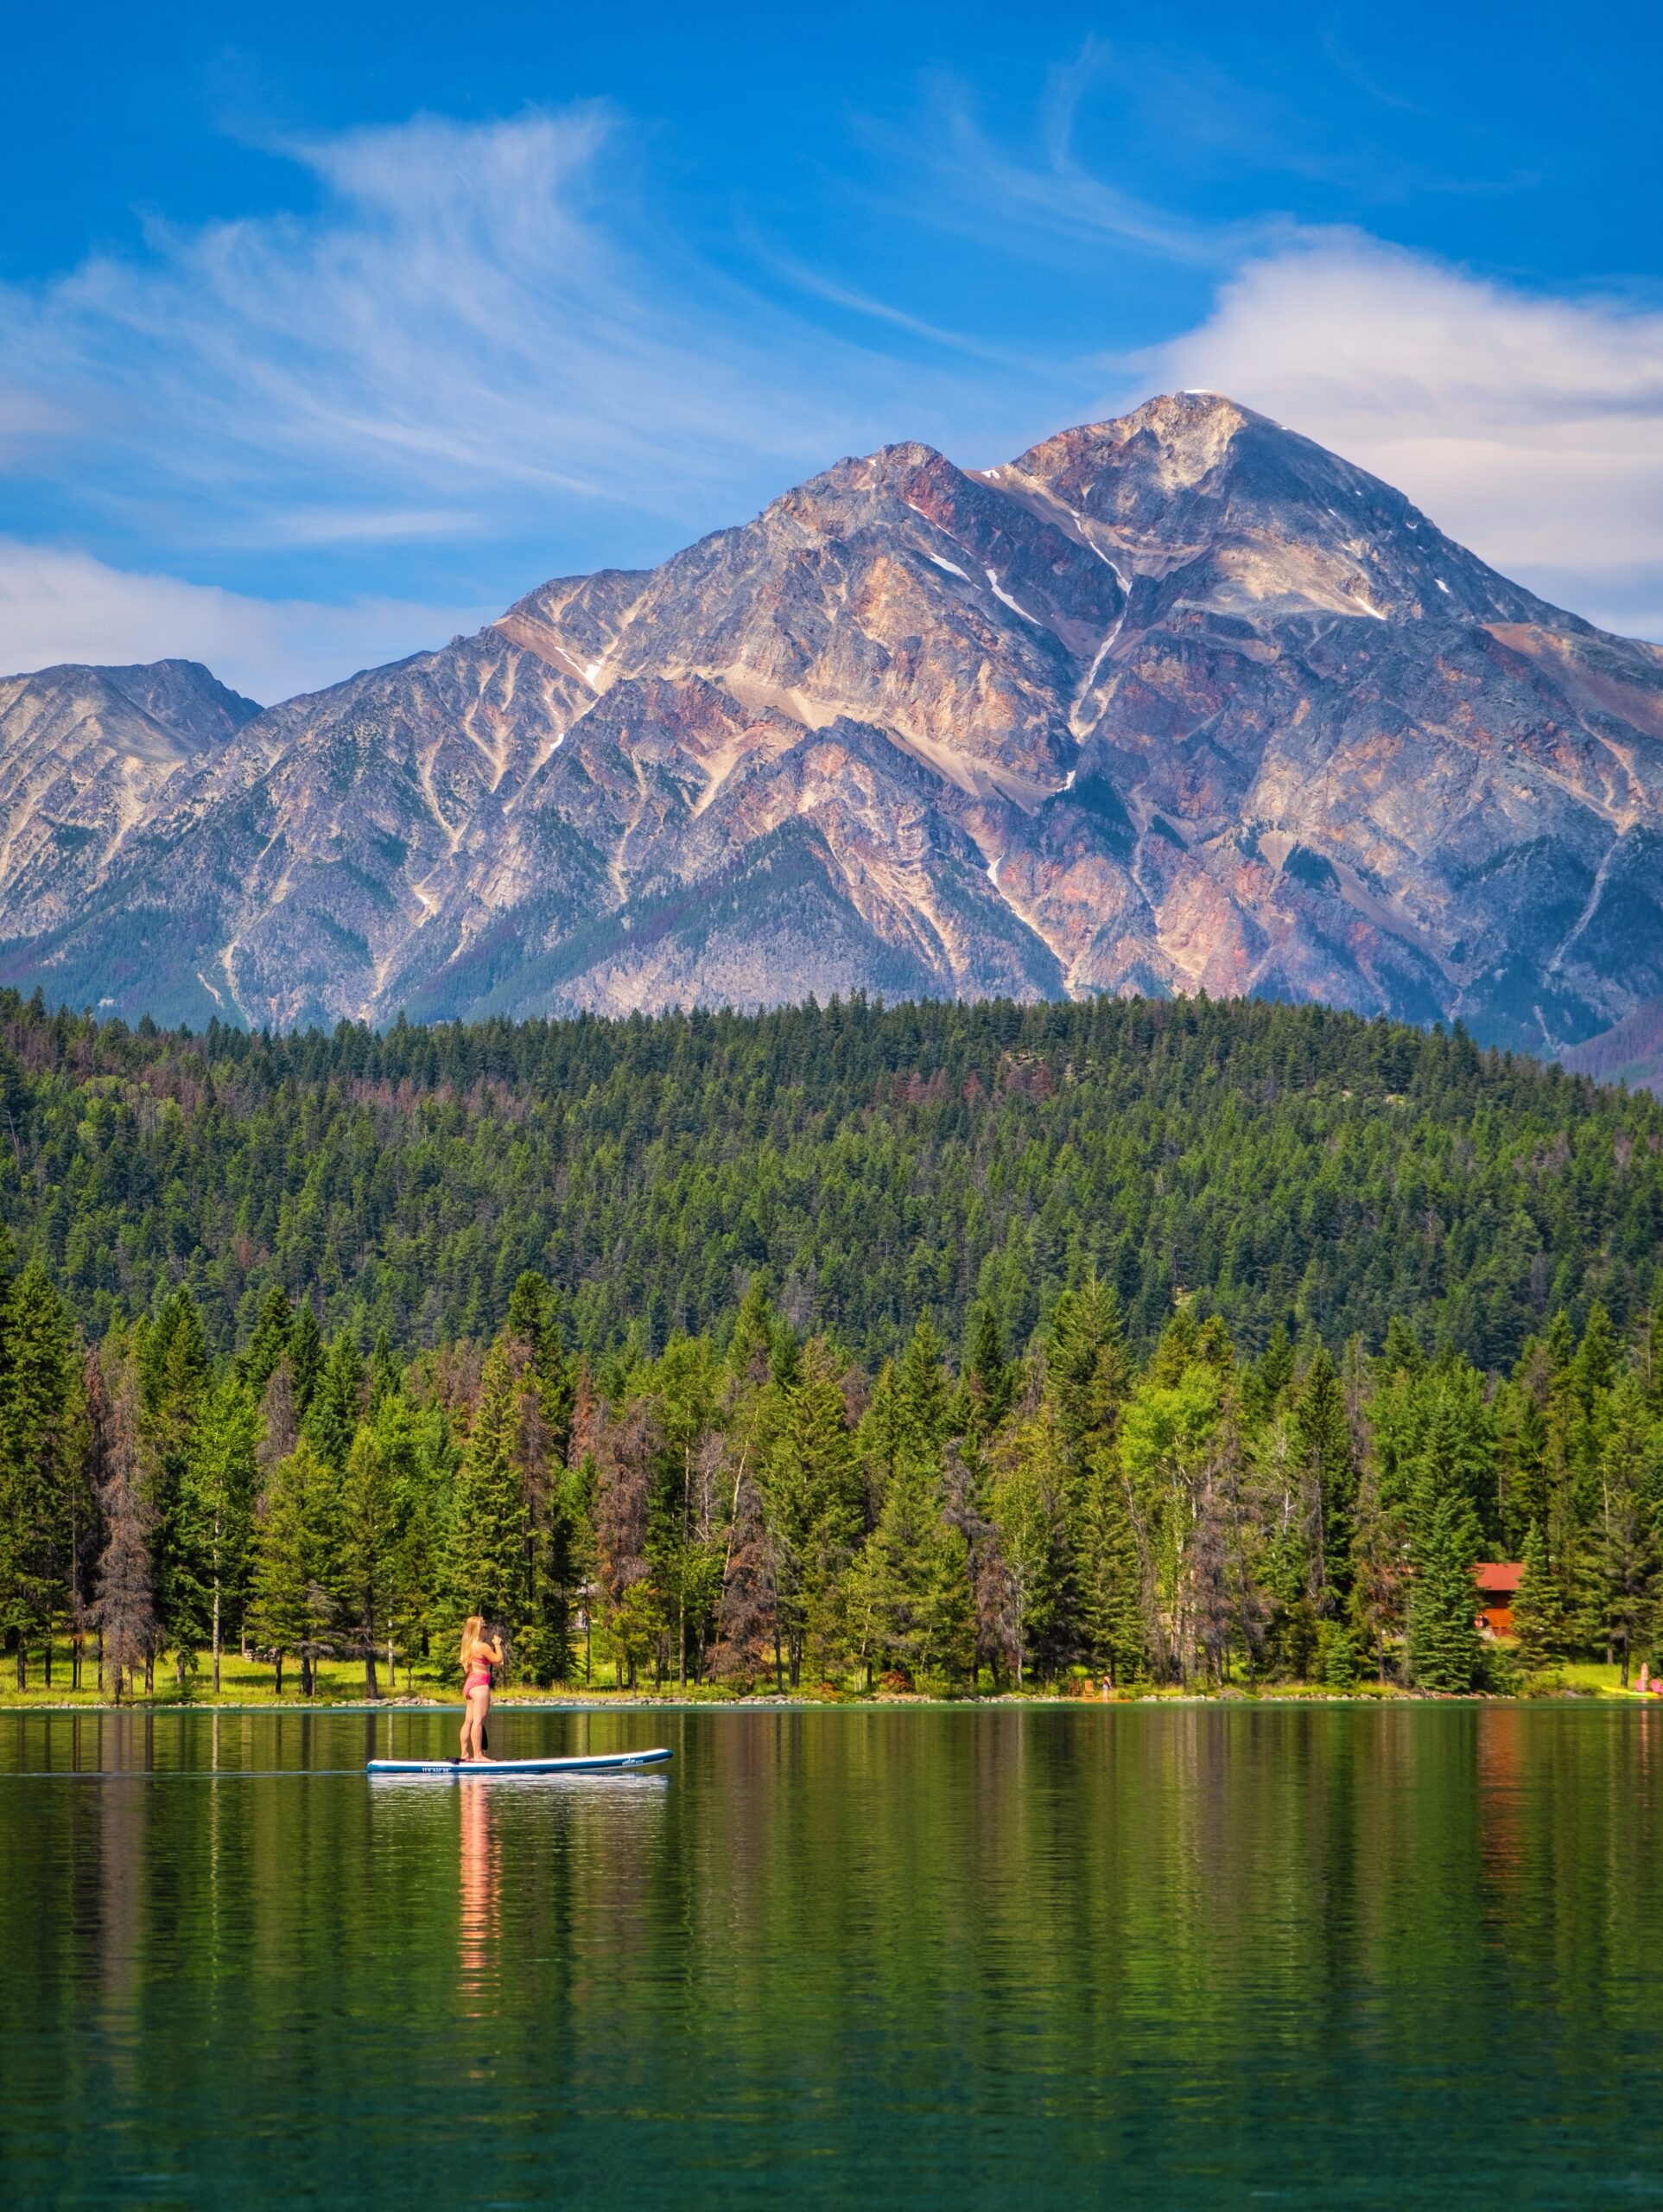 Standup Paddleboarding on Lake Edith is one of the great things to do in Jasper